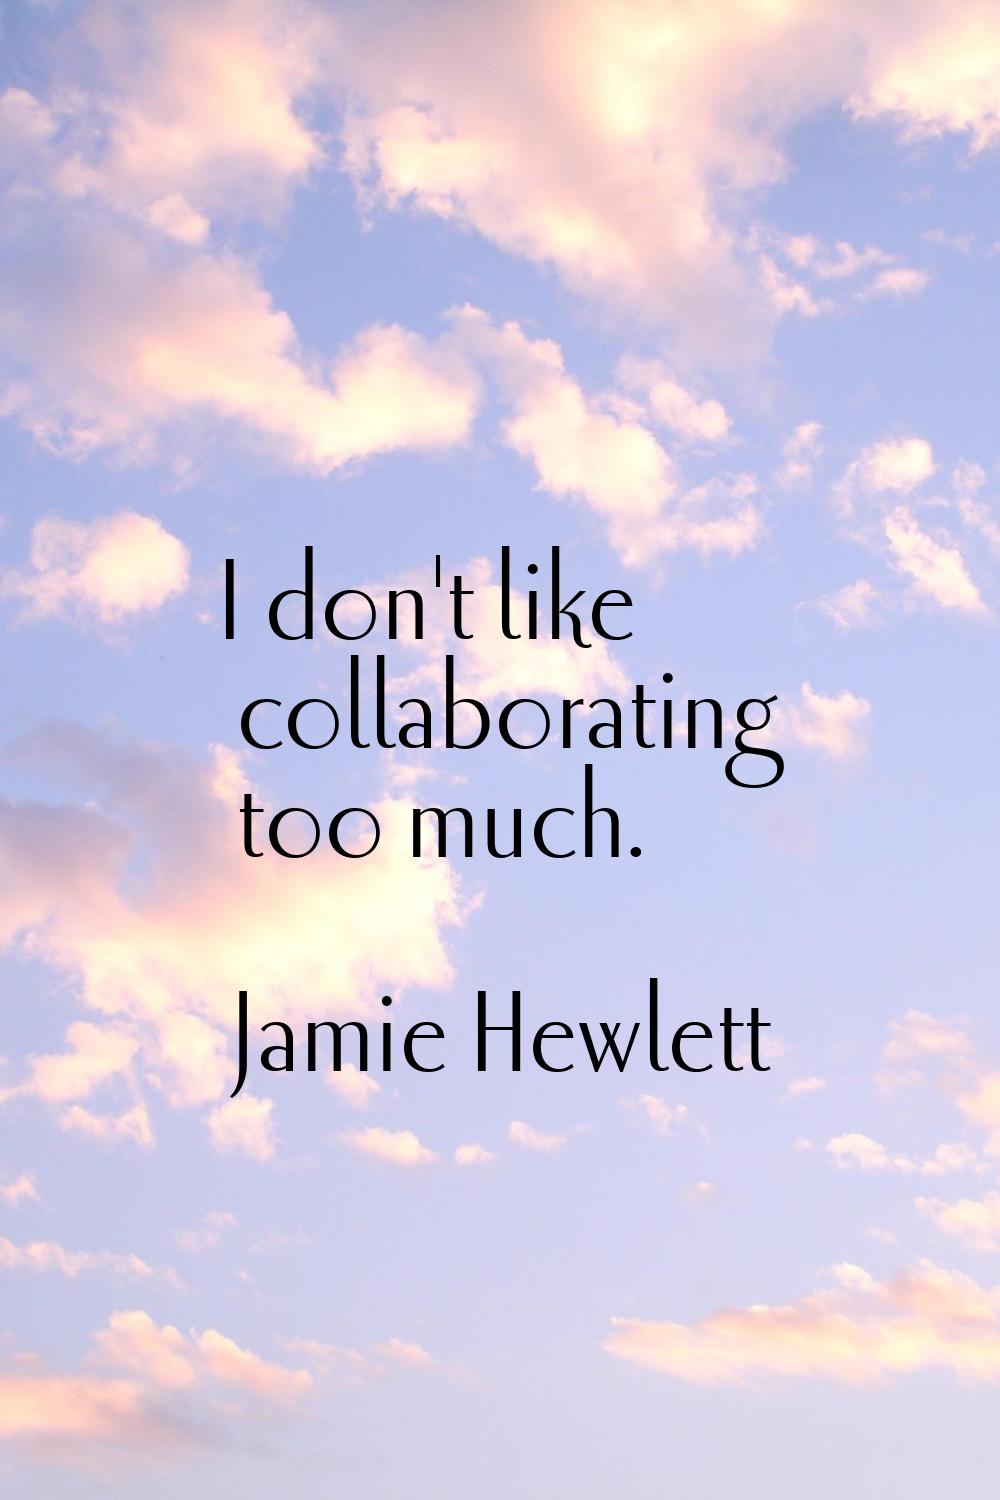 I don't like collaborating too much.